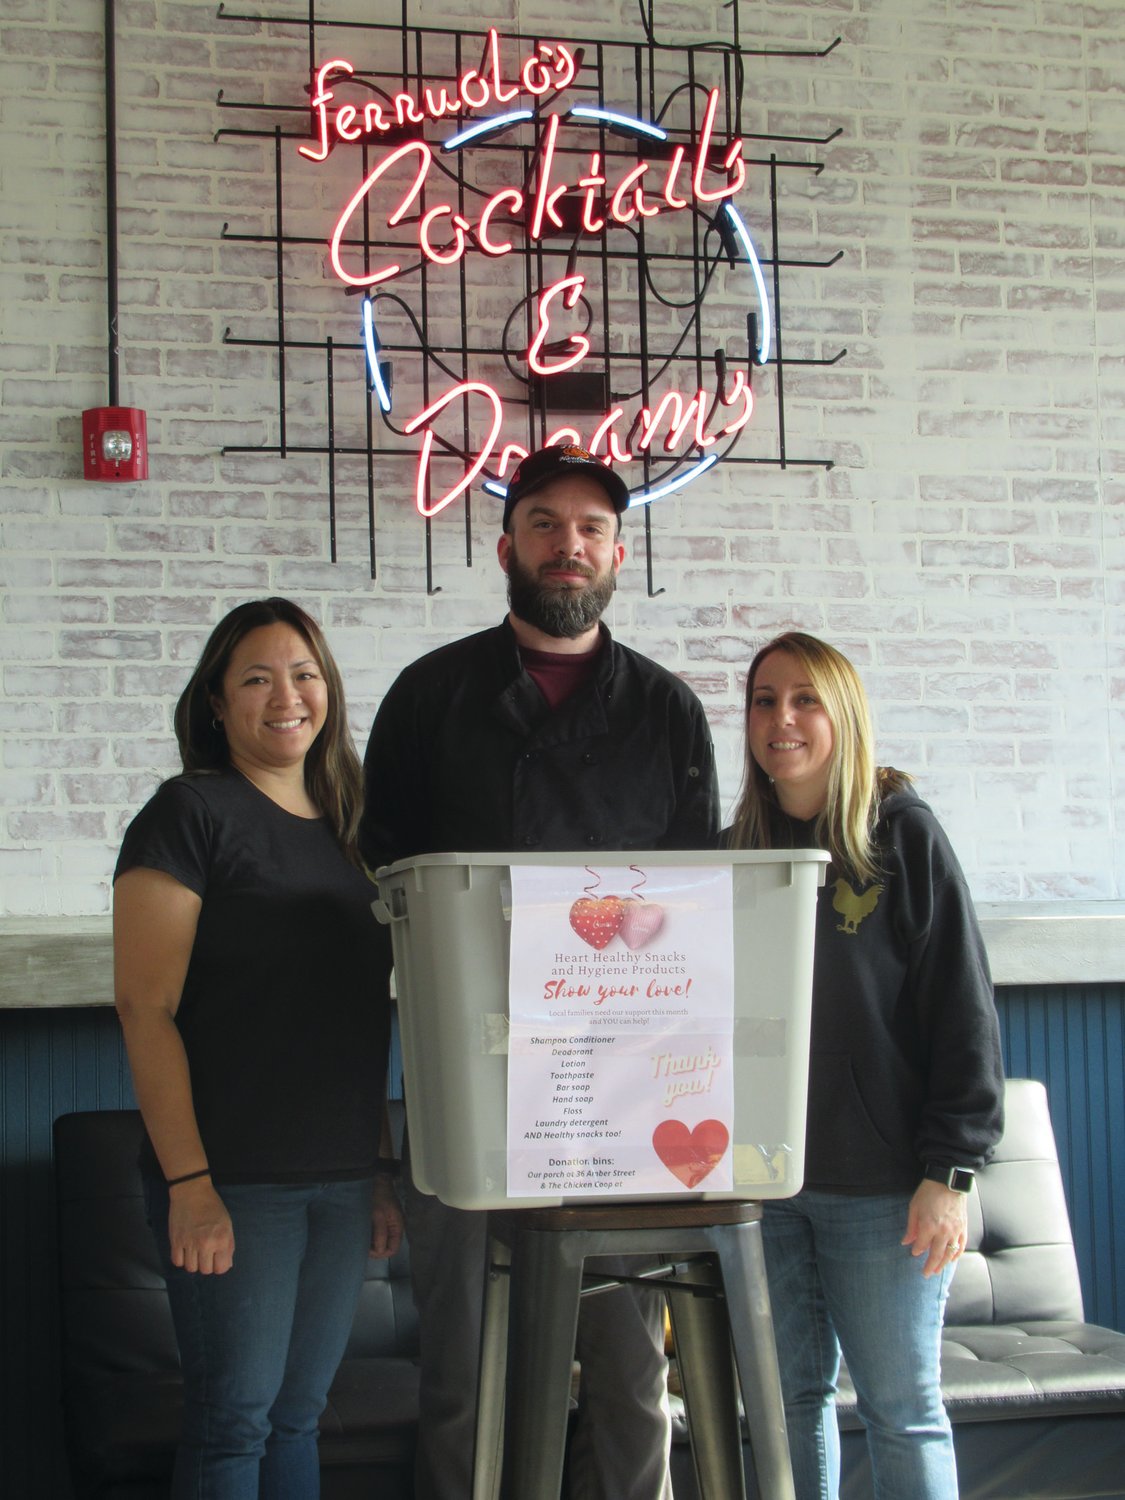 CHEF’S CORNER: Talented chef Justin Ferreira is joined by The Coop owners Meliza Ferruolo (left) and Tonya Antonelli after discussing such specials as loaded fries with Mozambique sauce, fried cauliflower bites and different wing sauces that are served seven days a week.